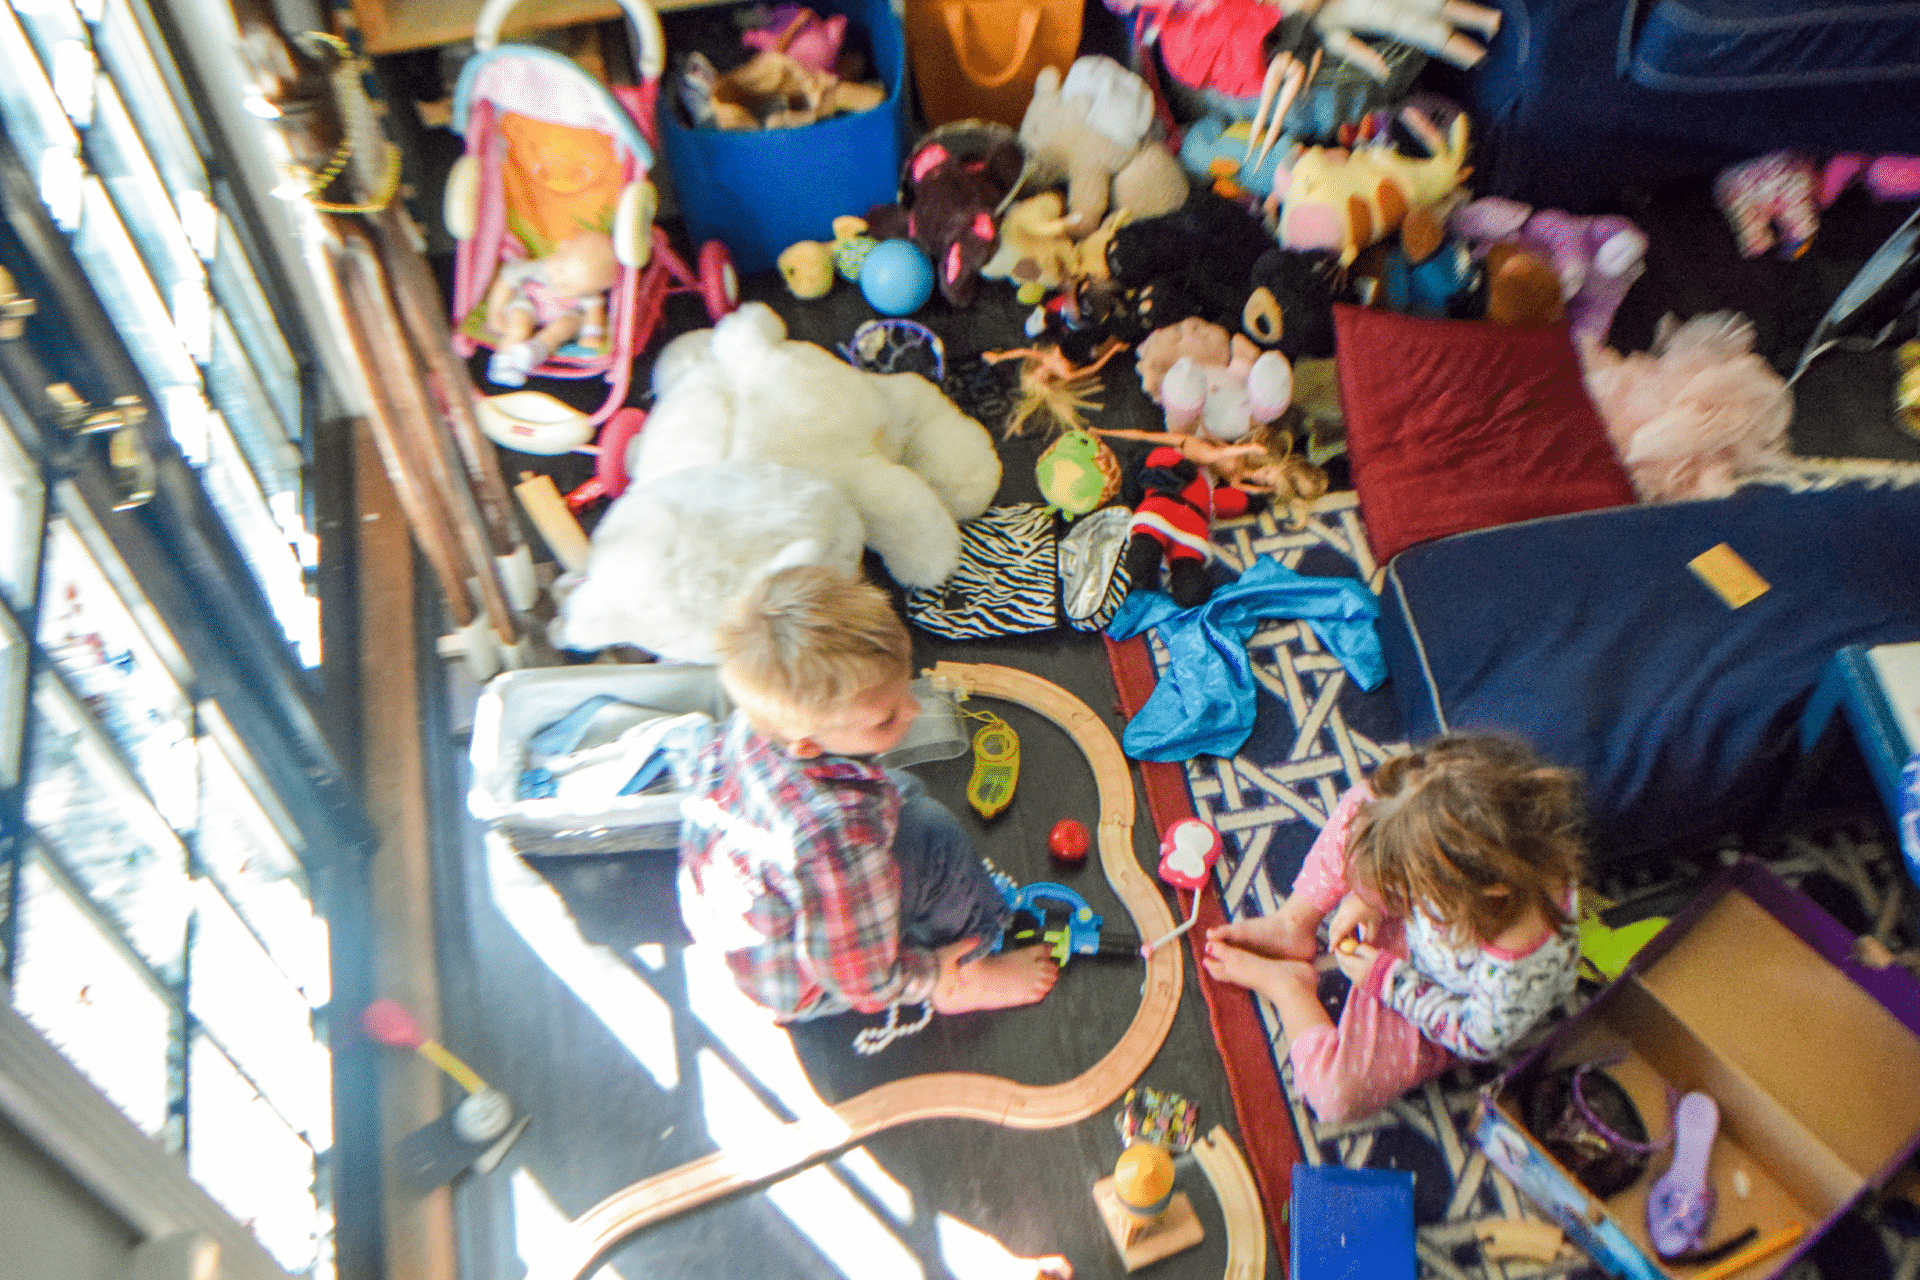 two children play on the floor of a very messy room with a floor covered in toys